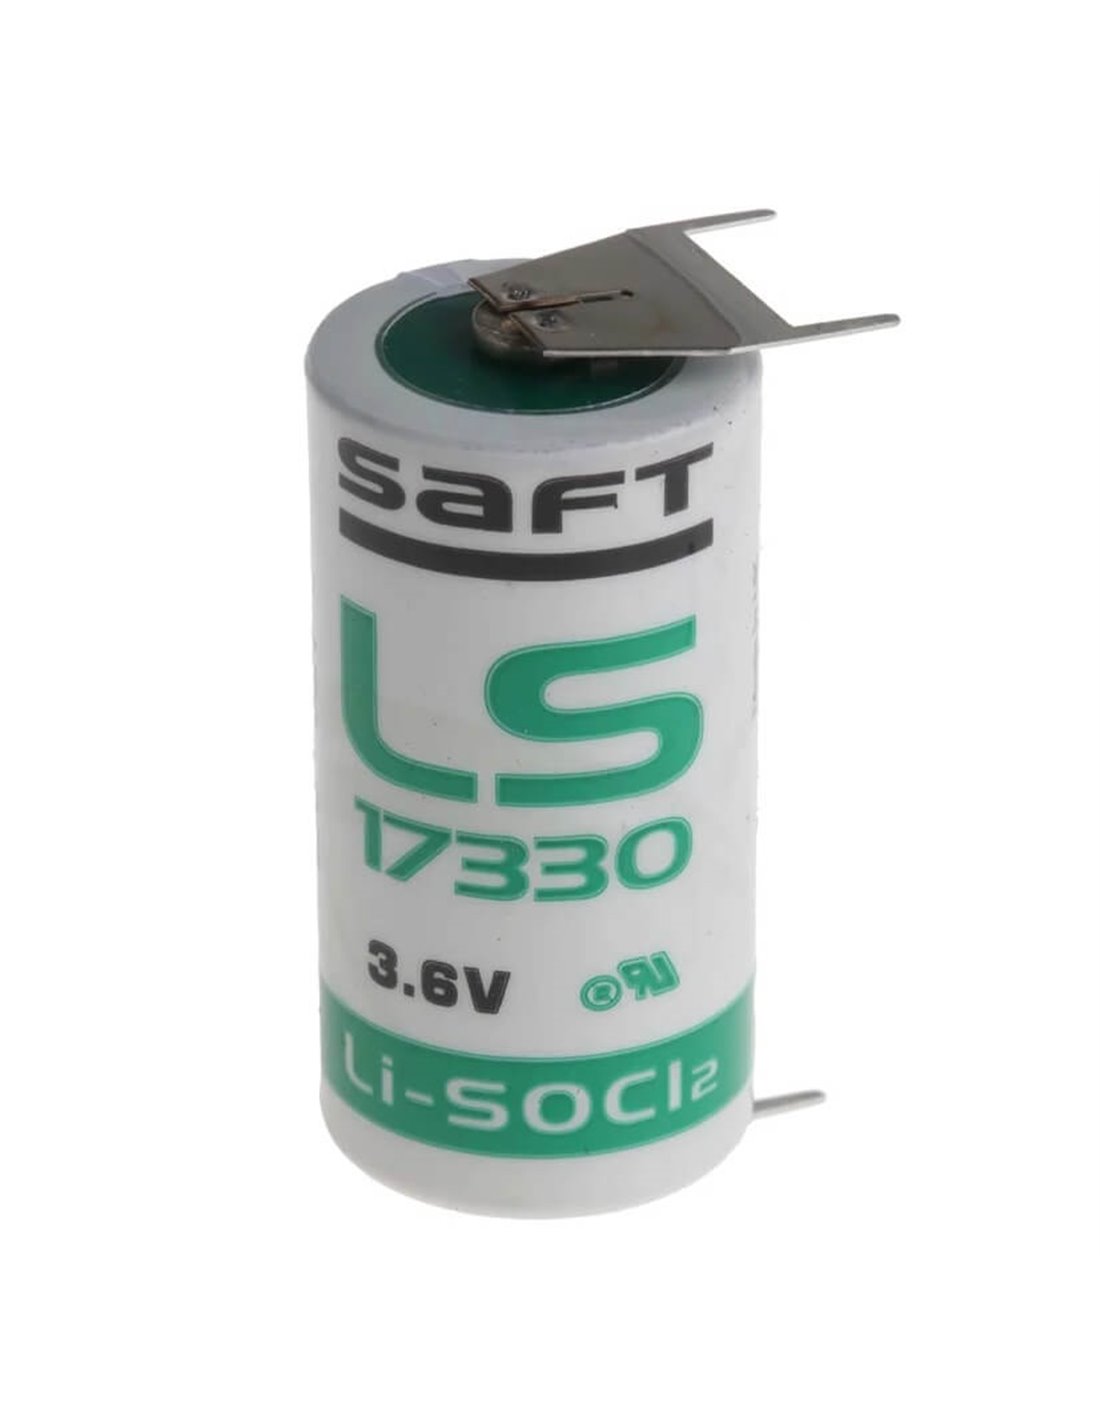 Saft LS17330 3.6V 2/3 A Size Lithium Battery 3.6V - Non Rechargeable